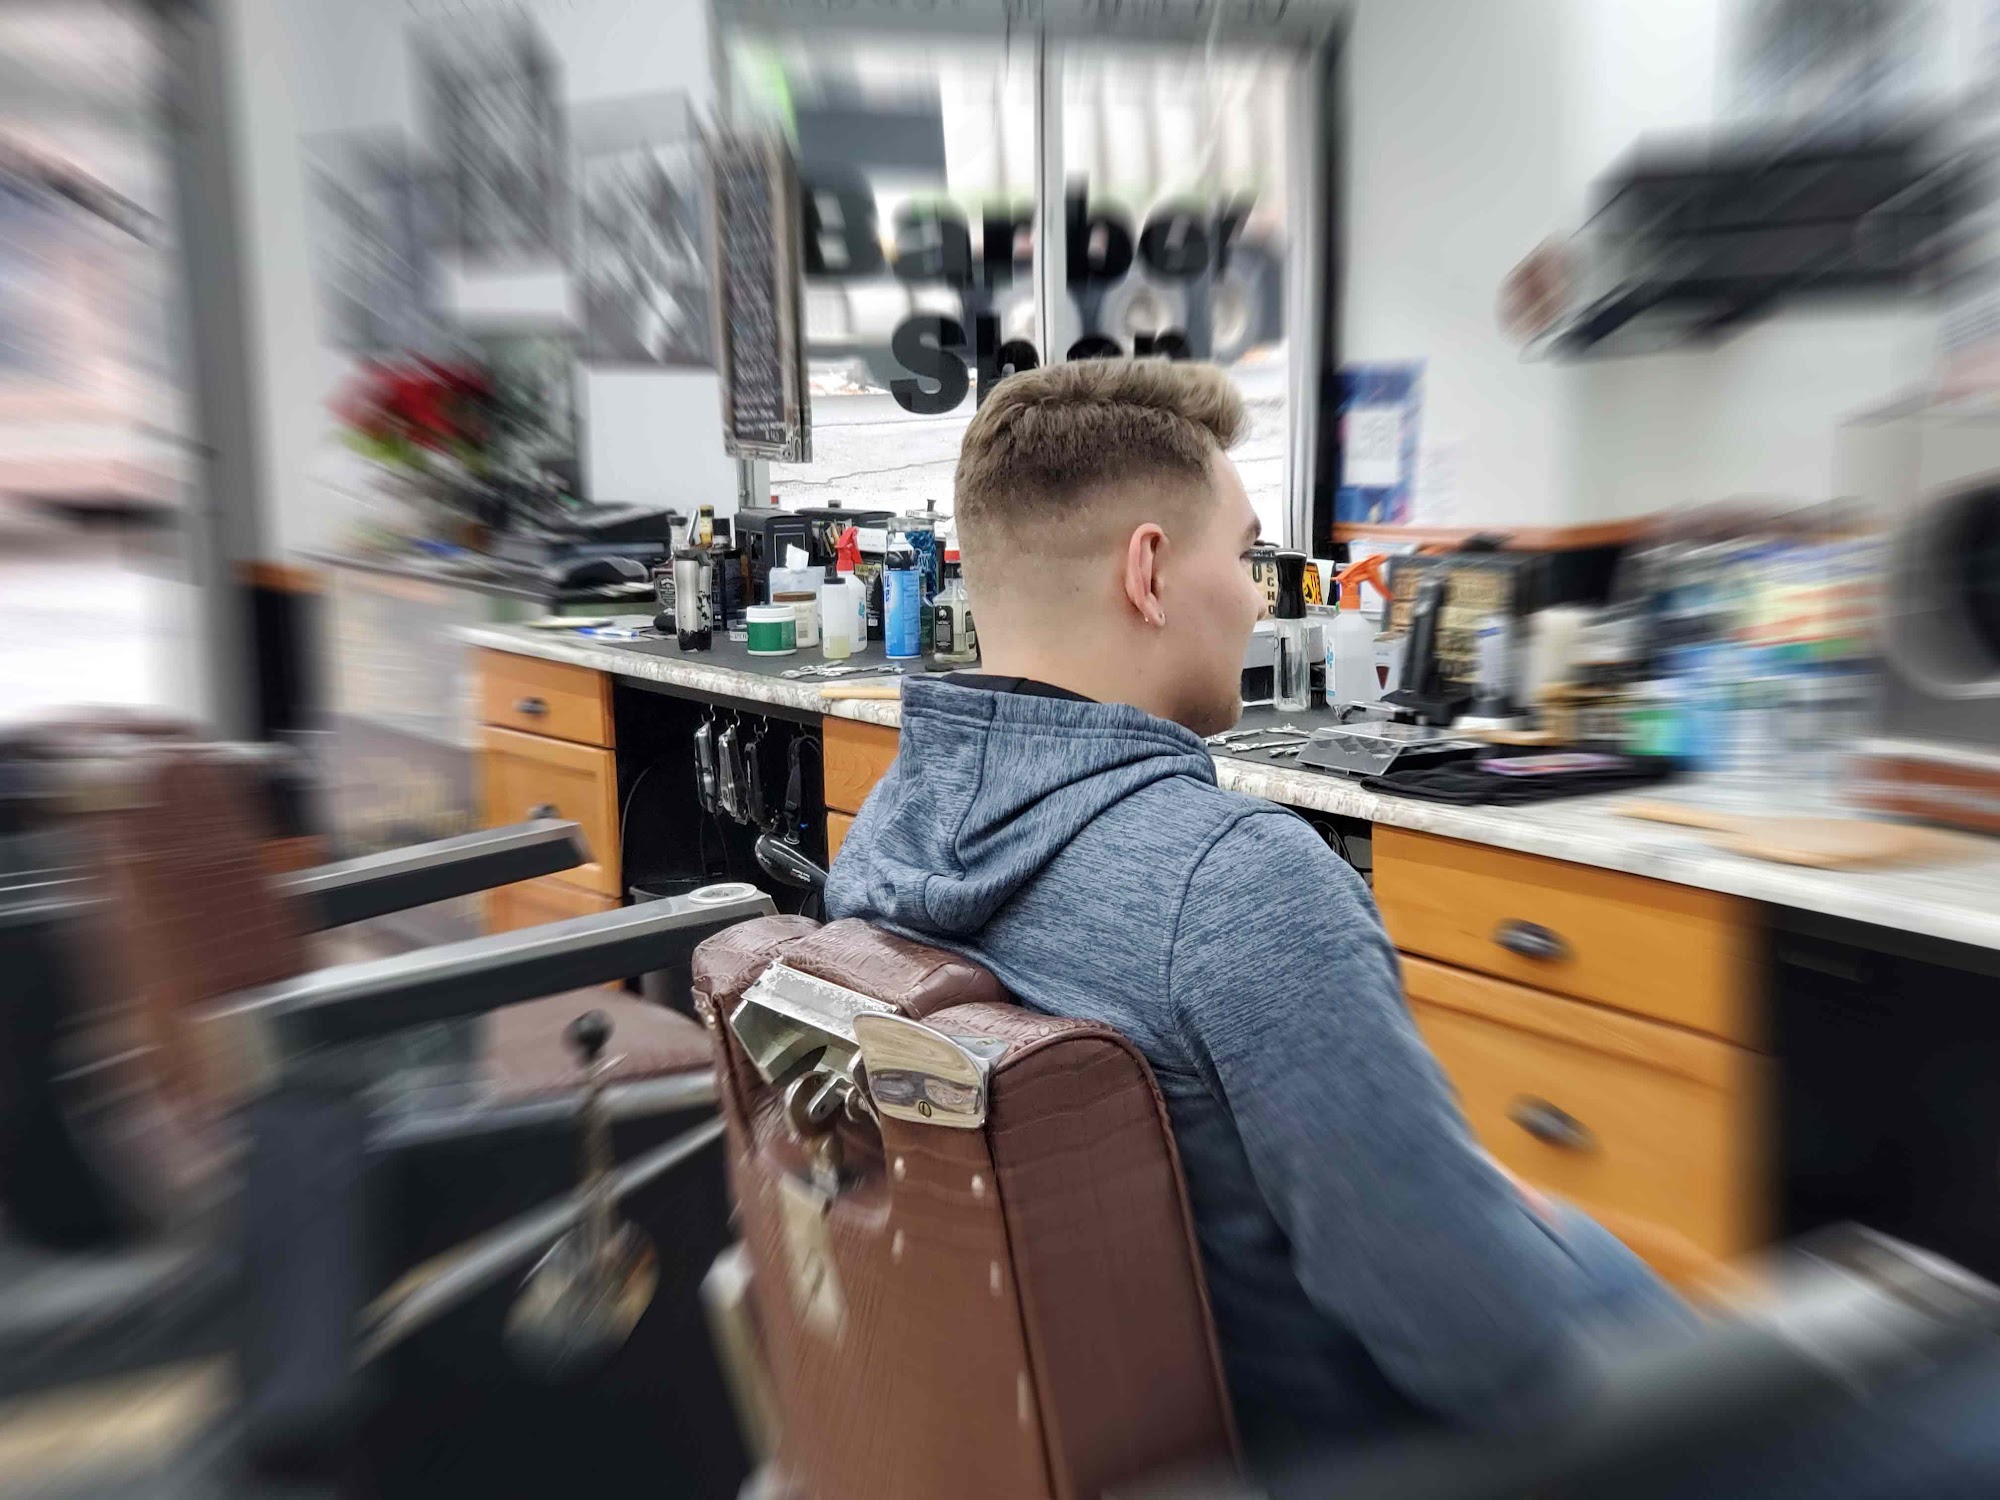 DiMarco's Barber Shop 770 NJ-15 South, Lake Hopatcong New Jersey 07849